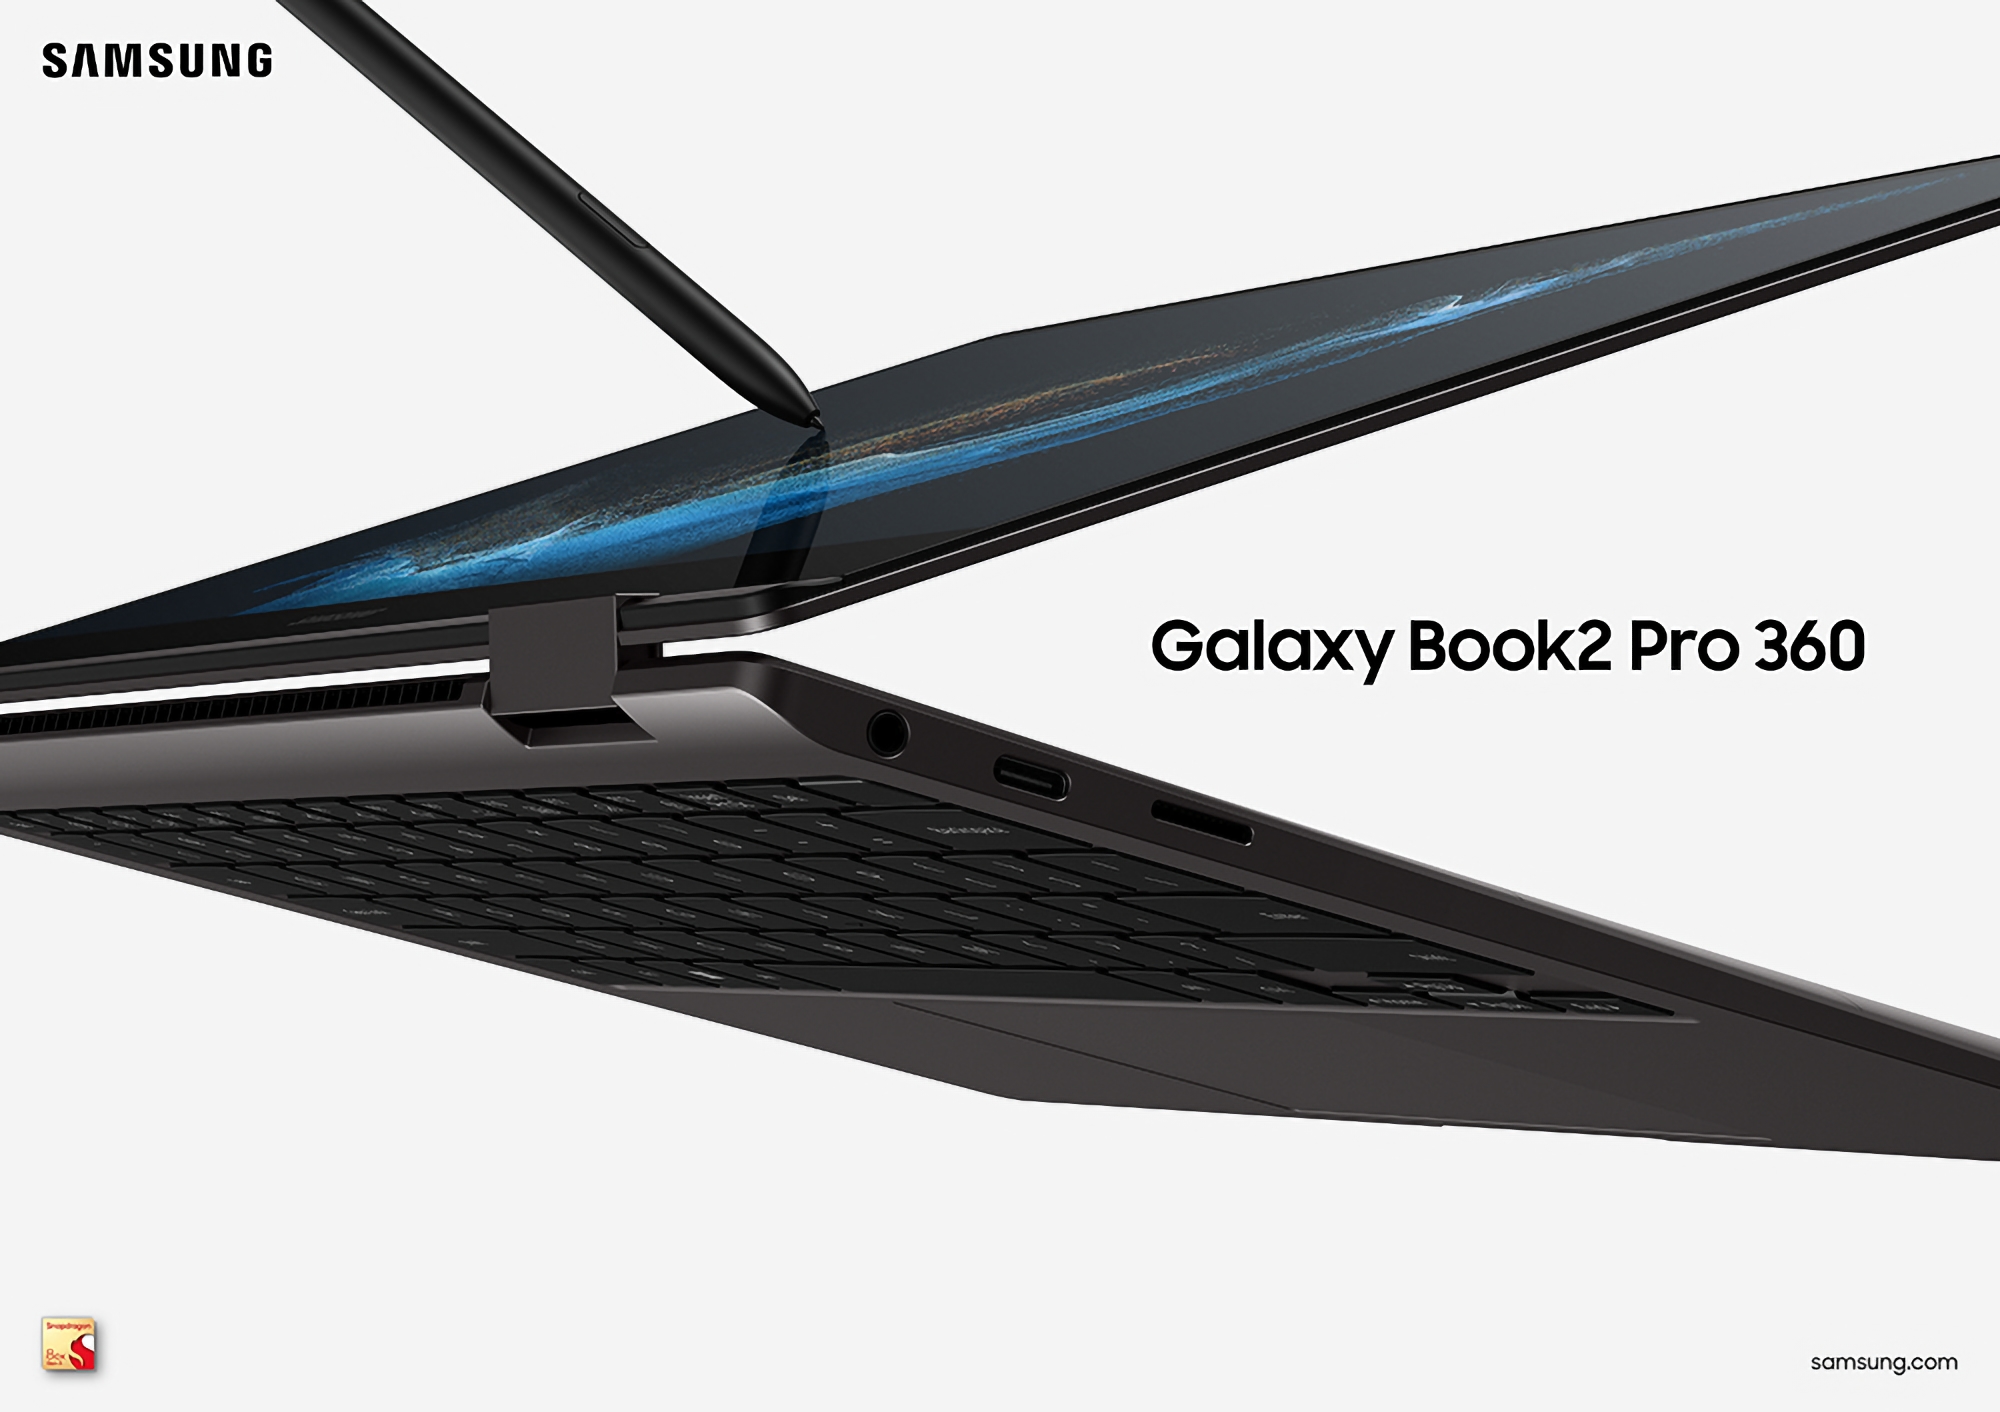 Samsung announced a new version of the Galaxy Book 2 Pro 360 with an ARM chip Qualcomm Snapdragon 8cx Gen 3